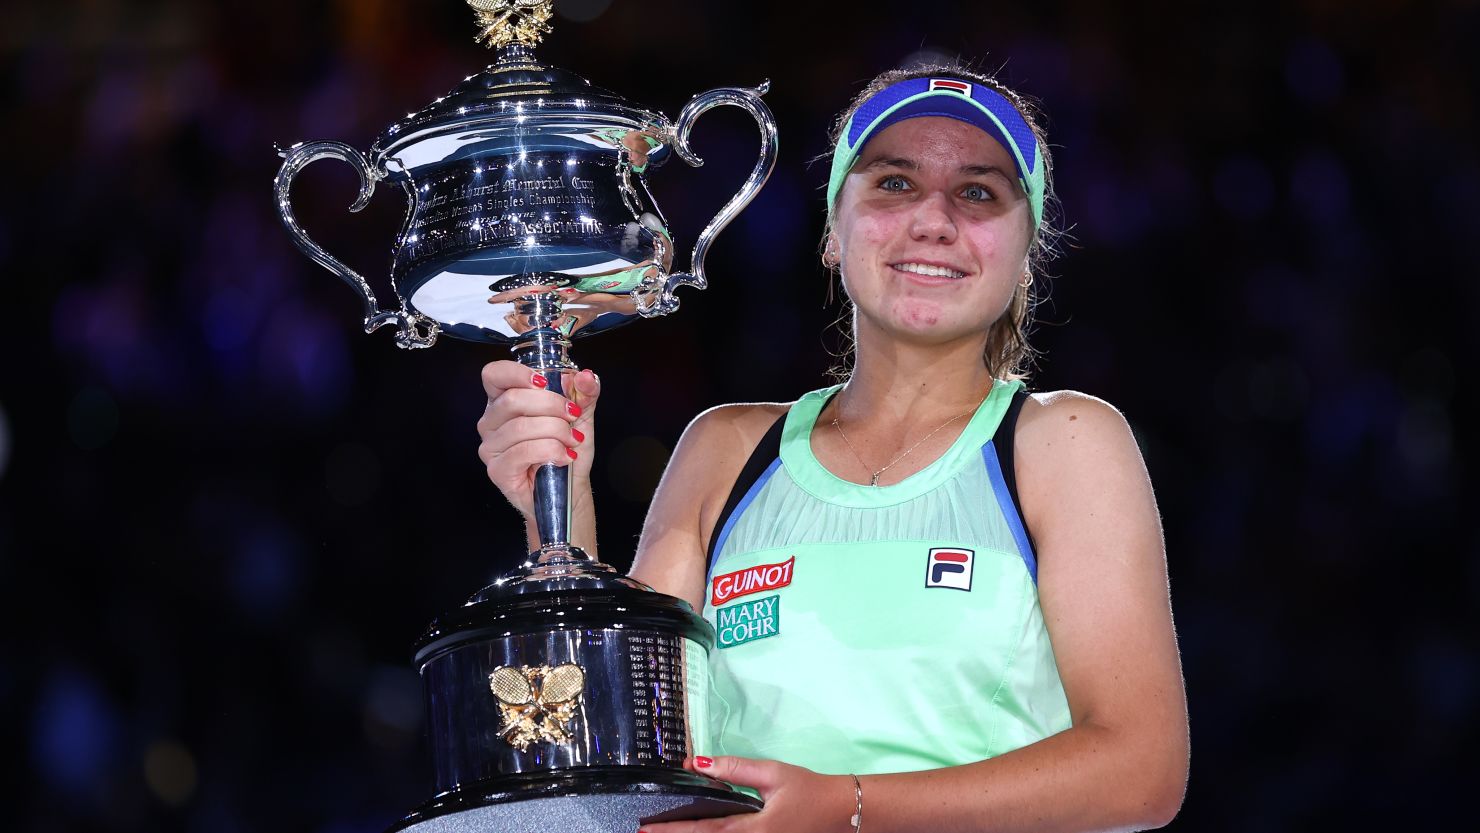 Sofia Kenin poses with the trophy after winning her first grand slam title